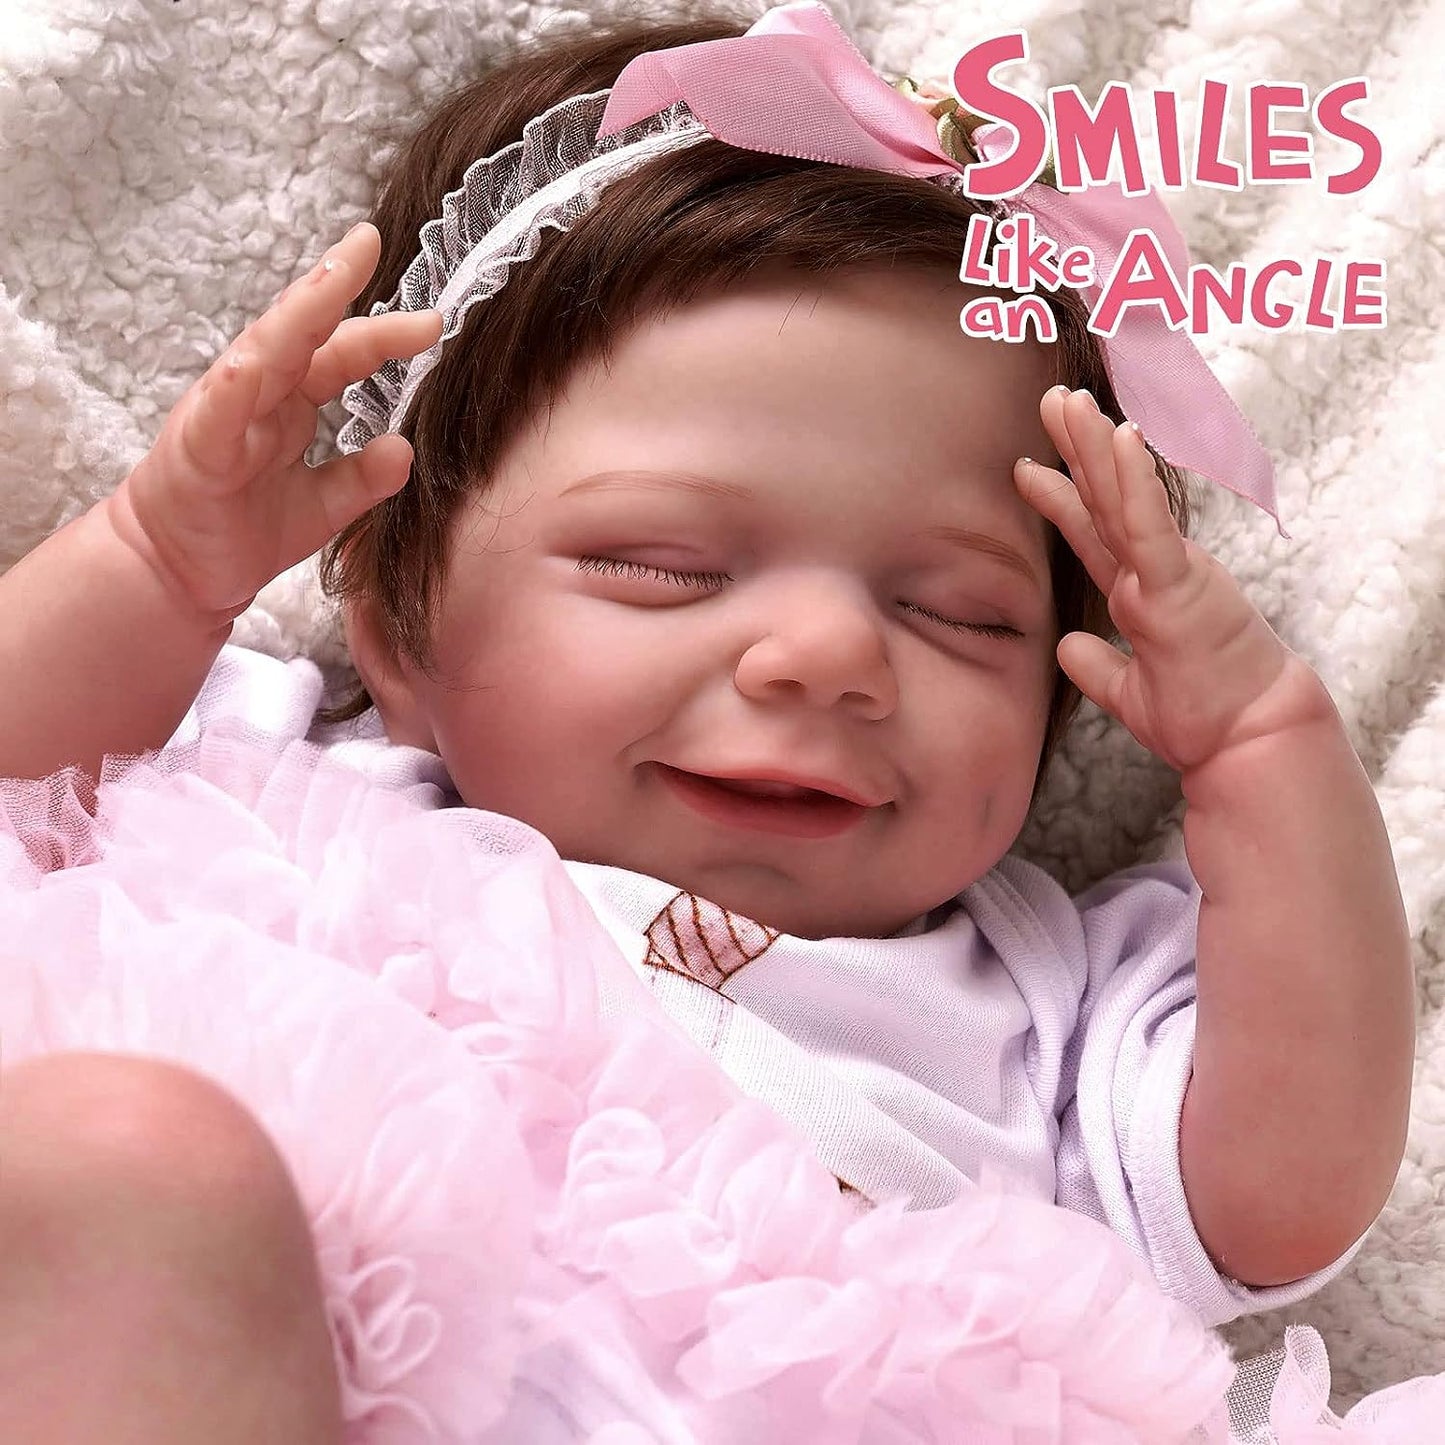 Full Body Silicone Smiling Reborn Doll 22 Inches - Mary